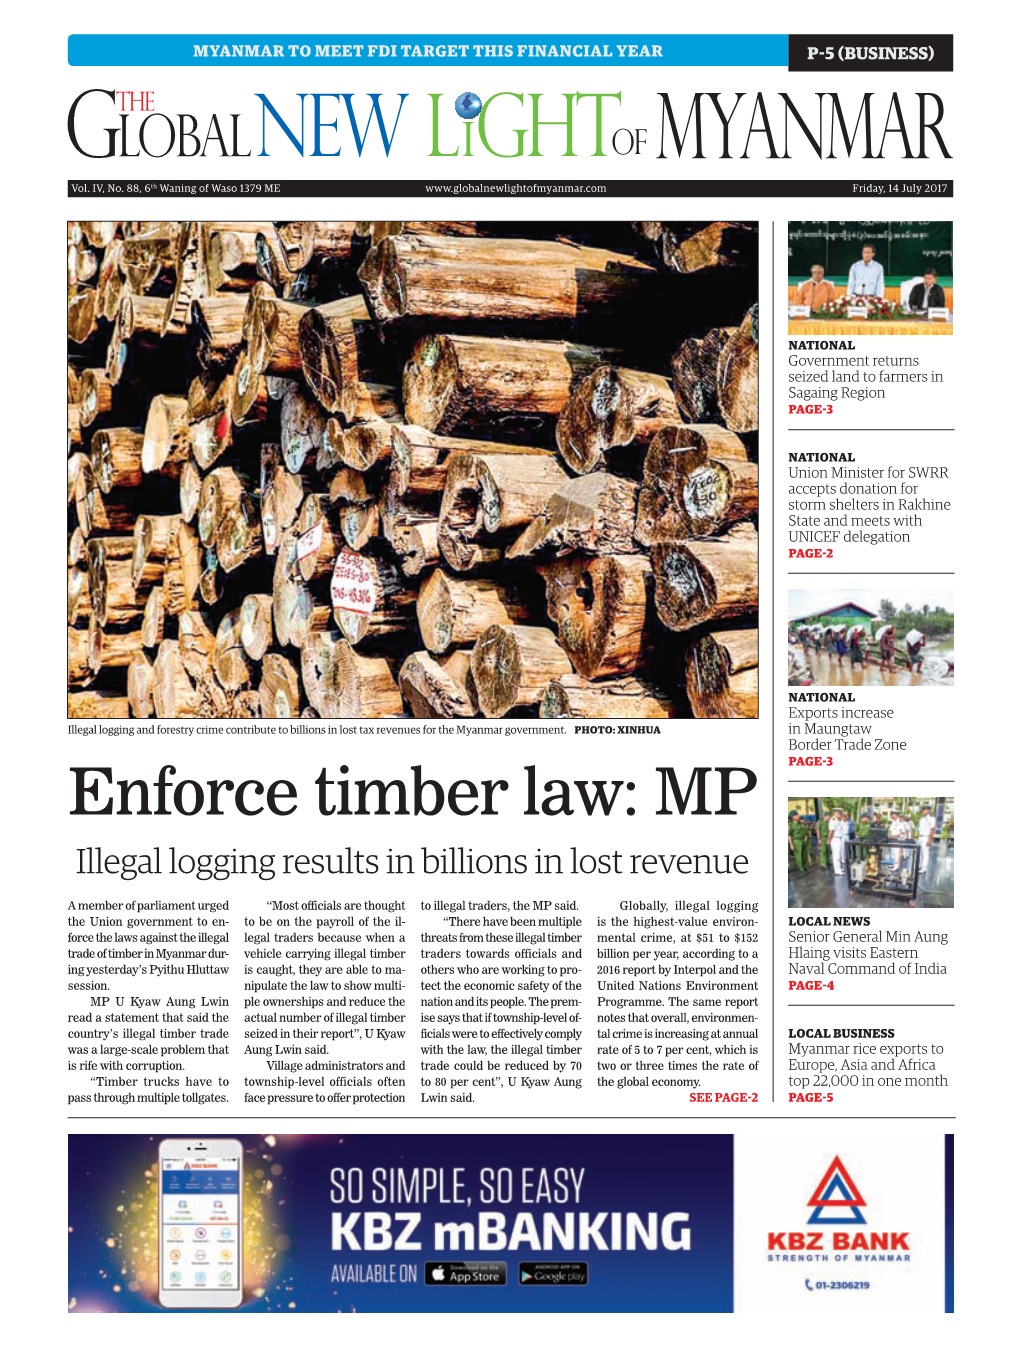 Enforce Timber Law: MP Illegal Logging Results in Billions in Lost Revenue